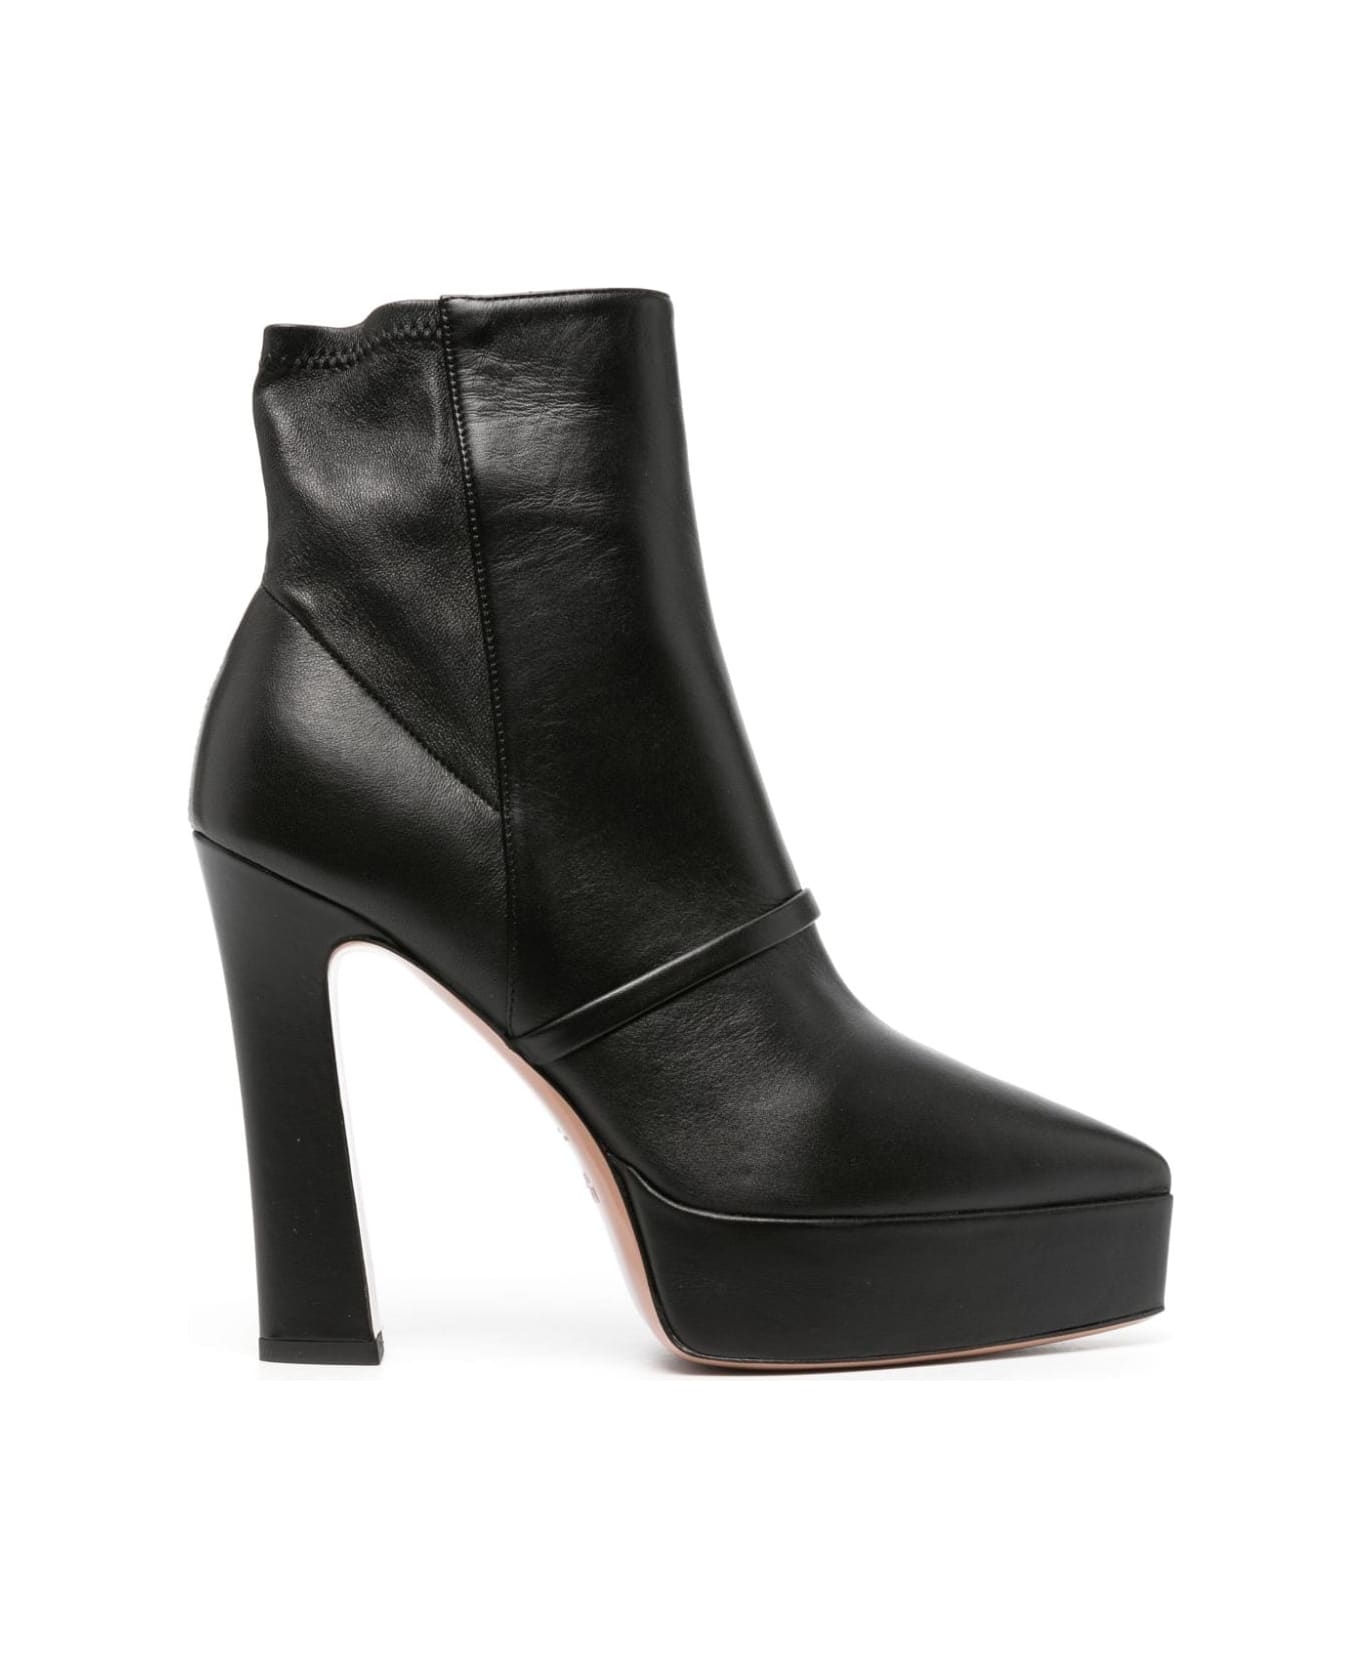 Malone Souliers Rue 125 High Heel Ankle Boots - Black  Black